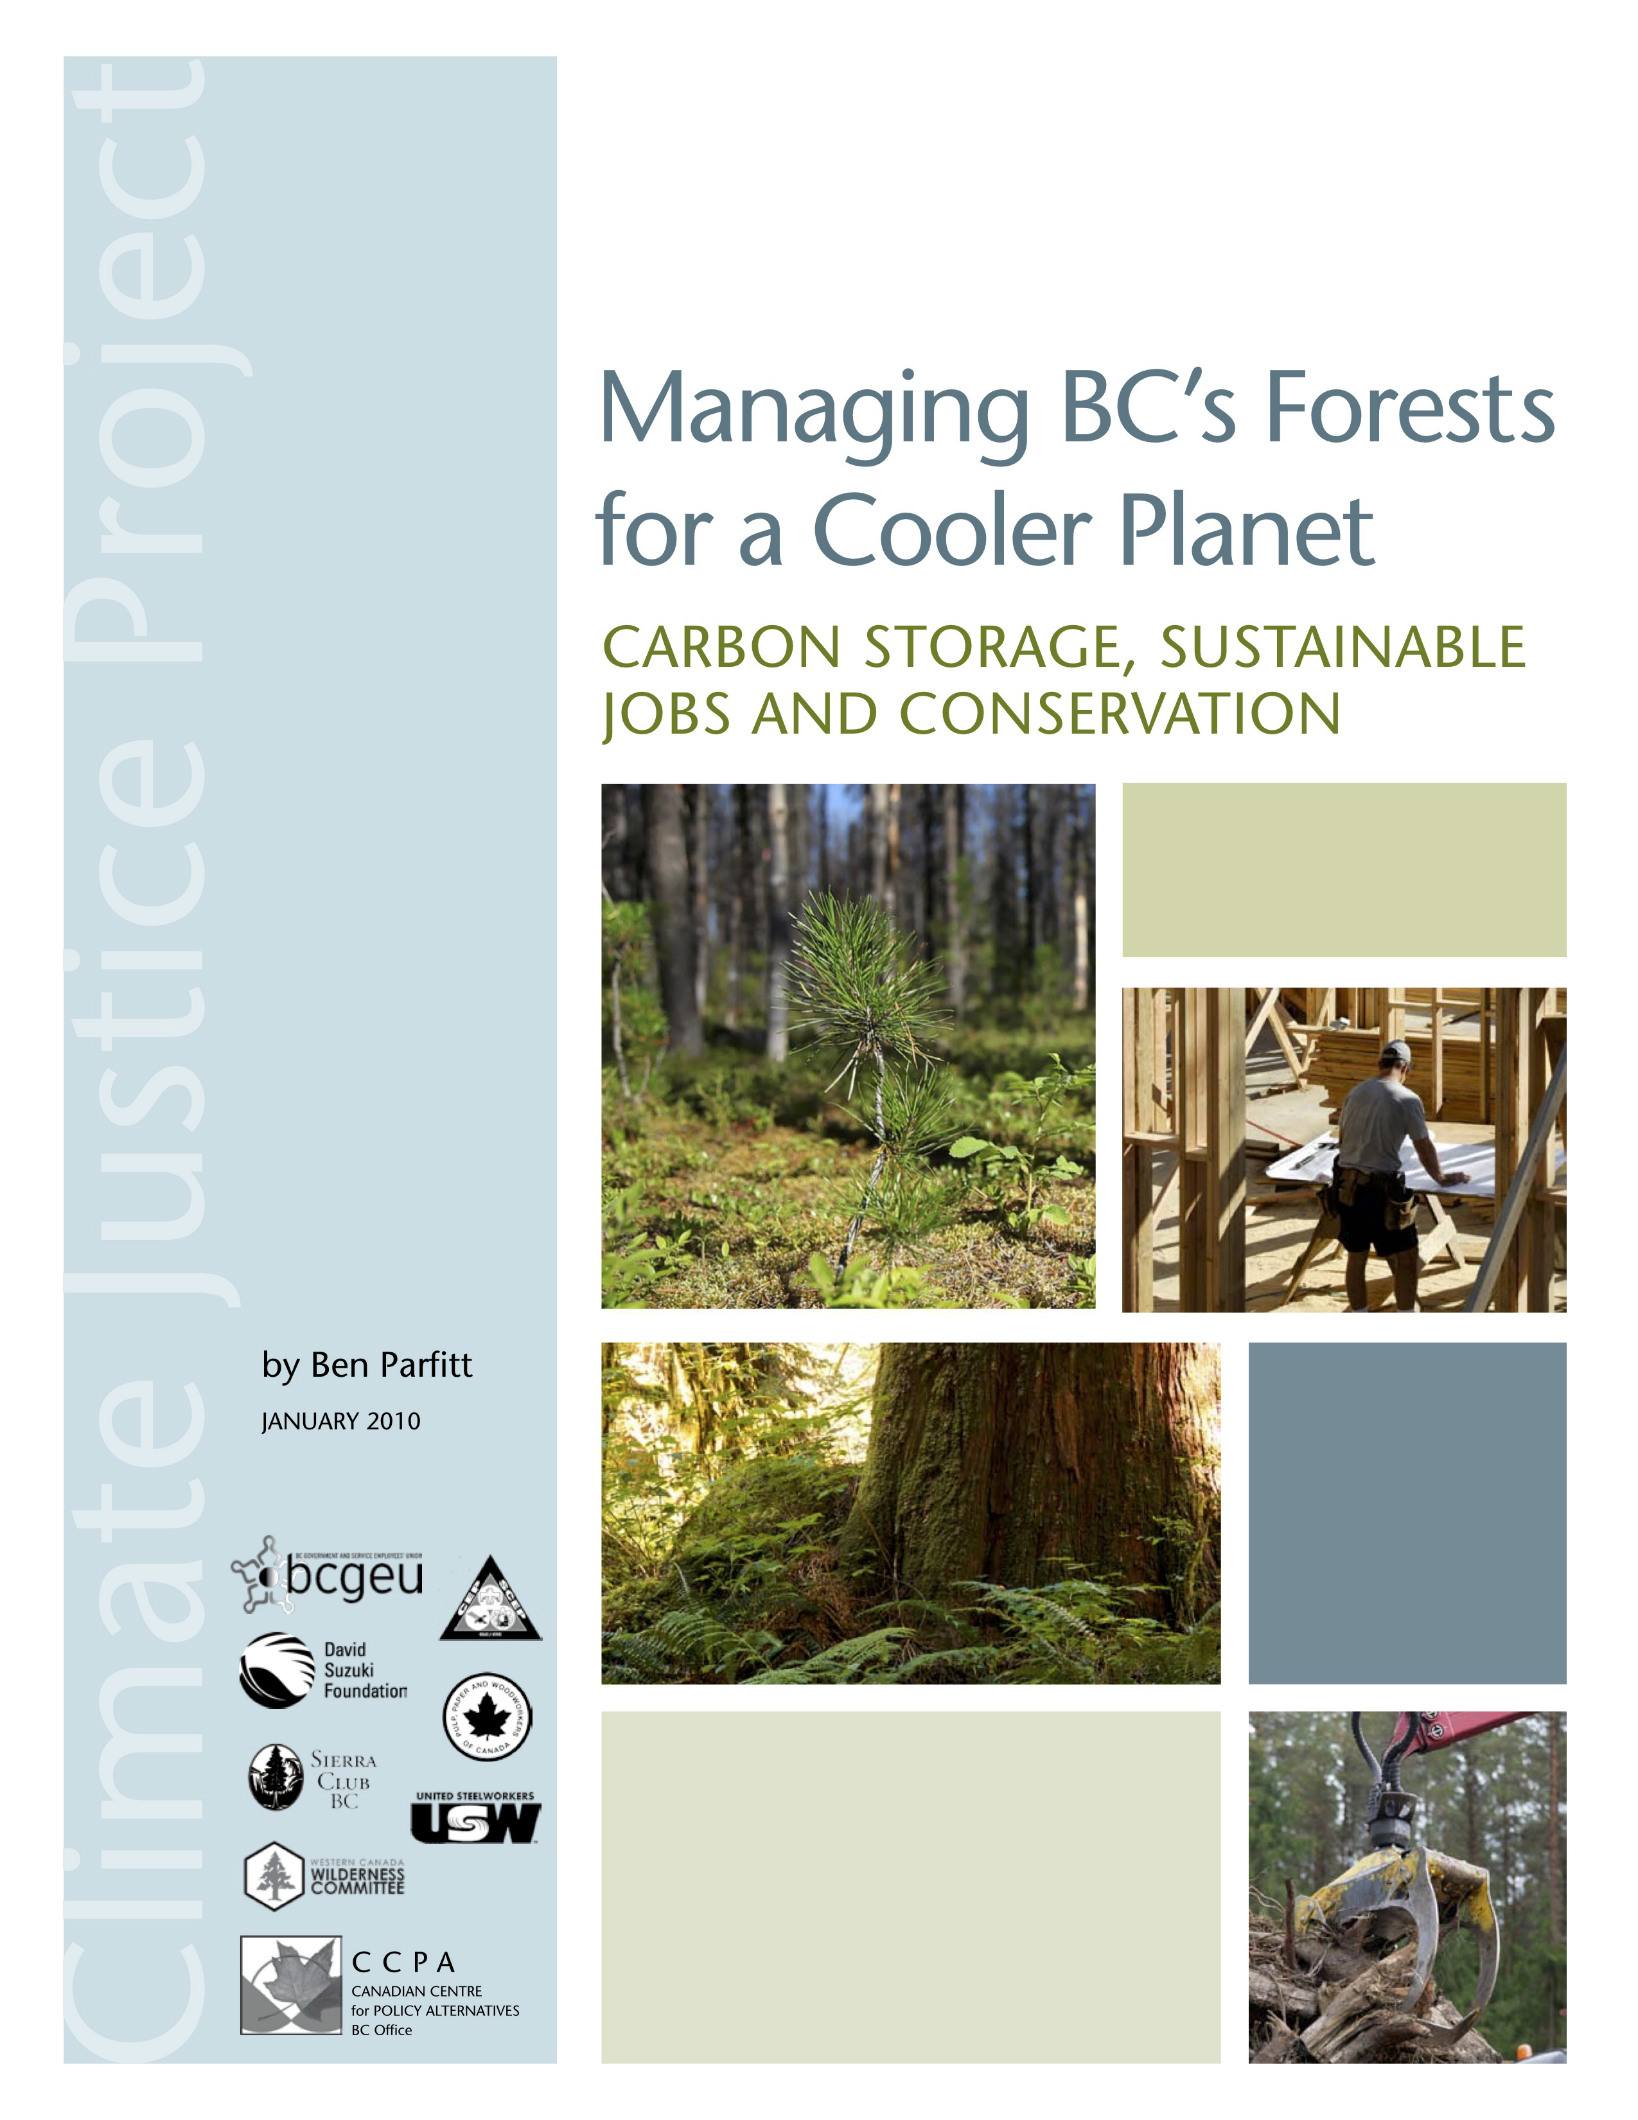 Managing B.C.'s Forests for a Cooler Planet: Carbon Storage, Sustainable Jobs and Conservation